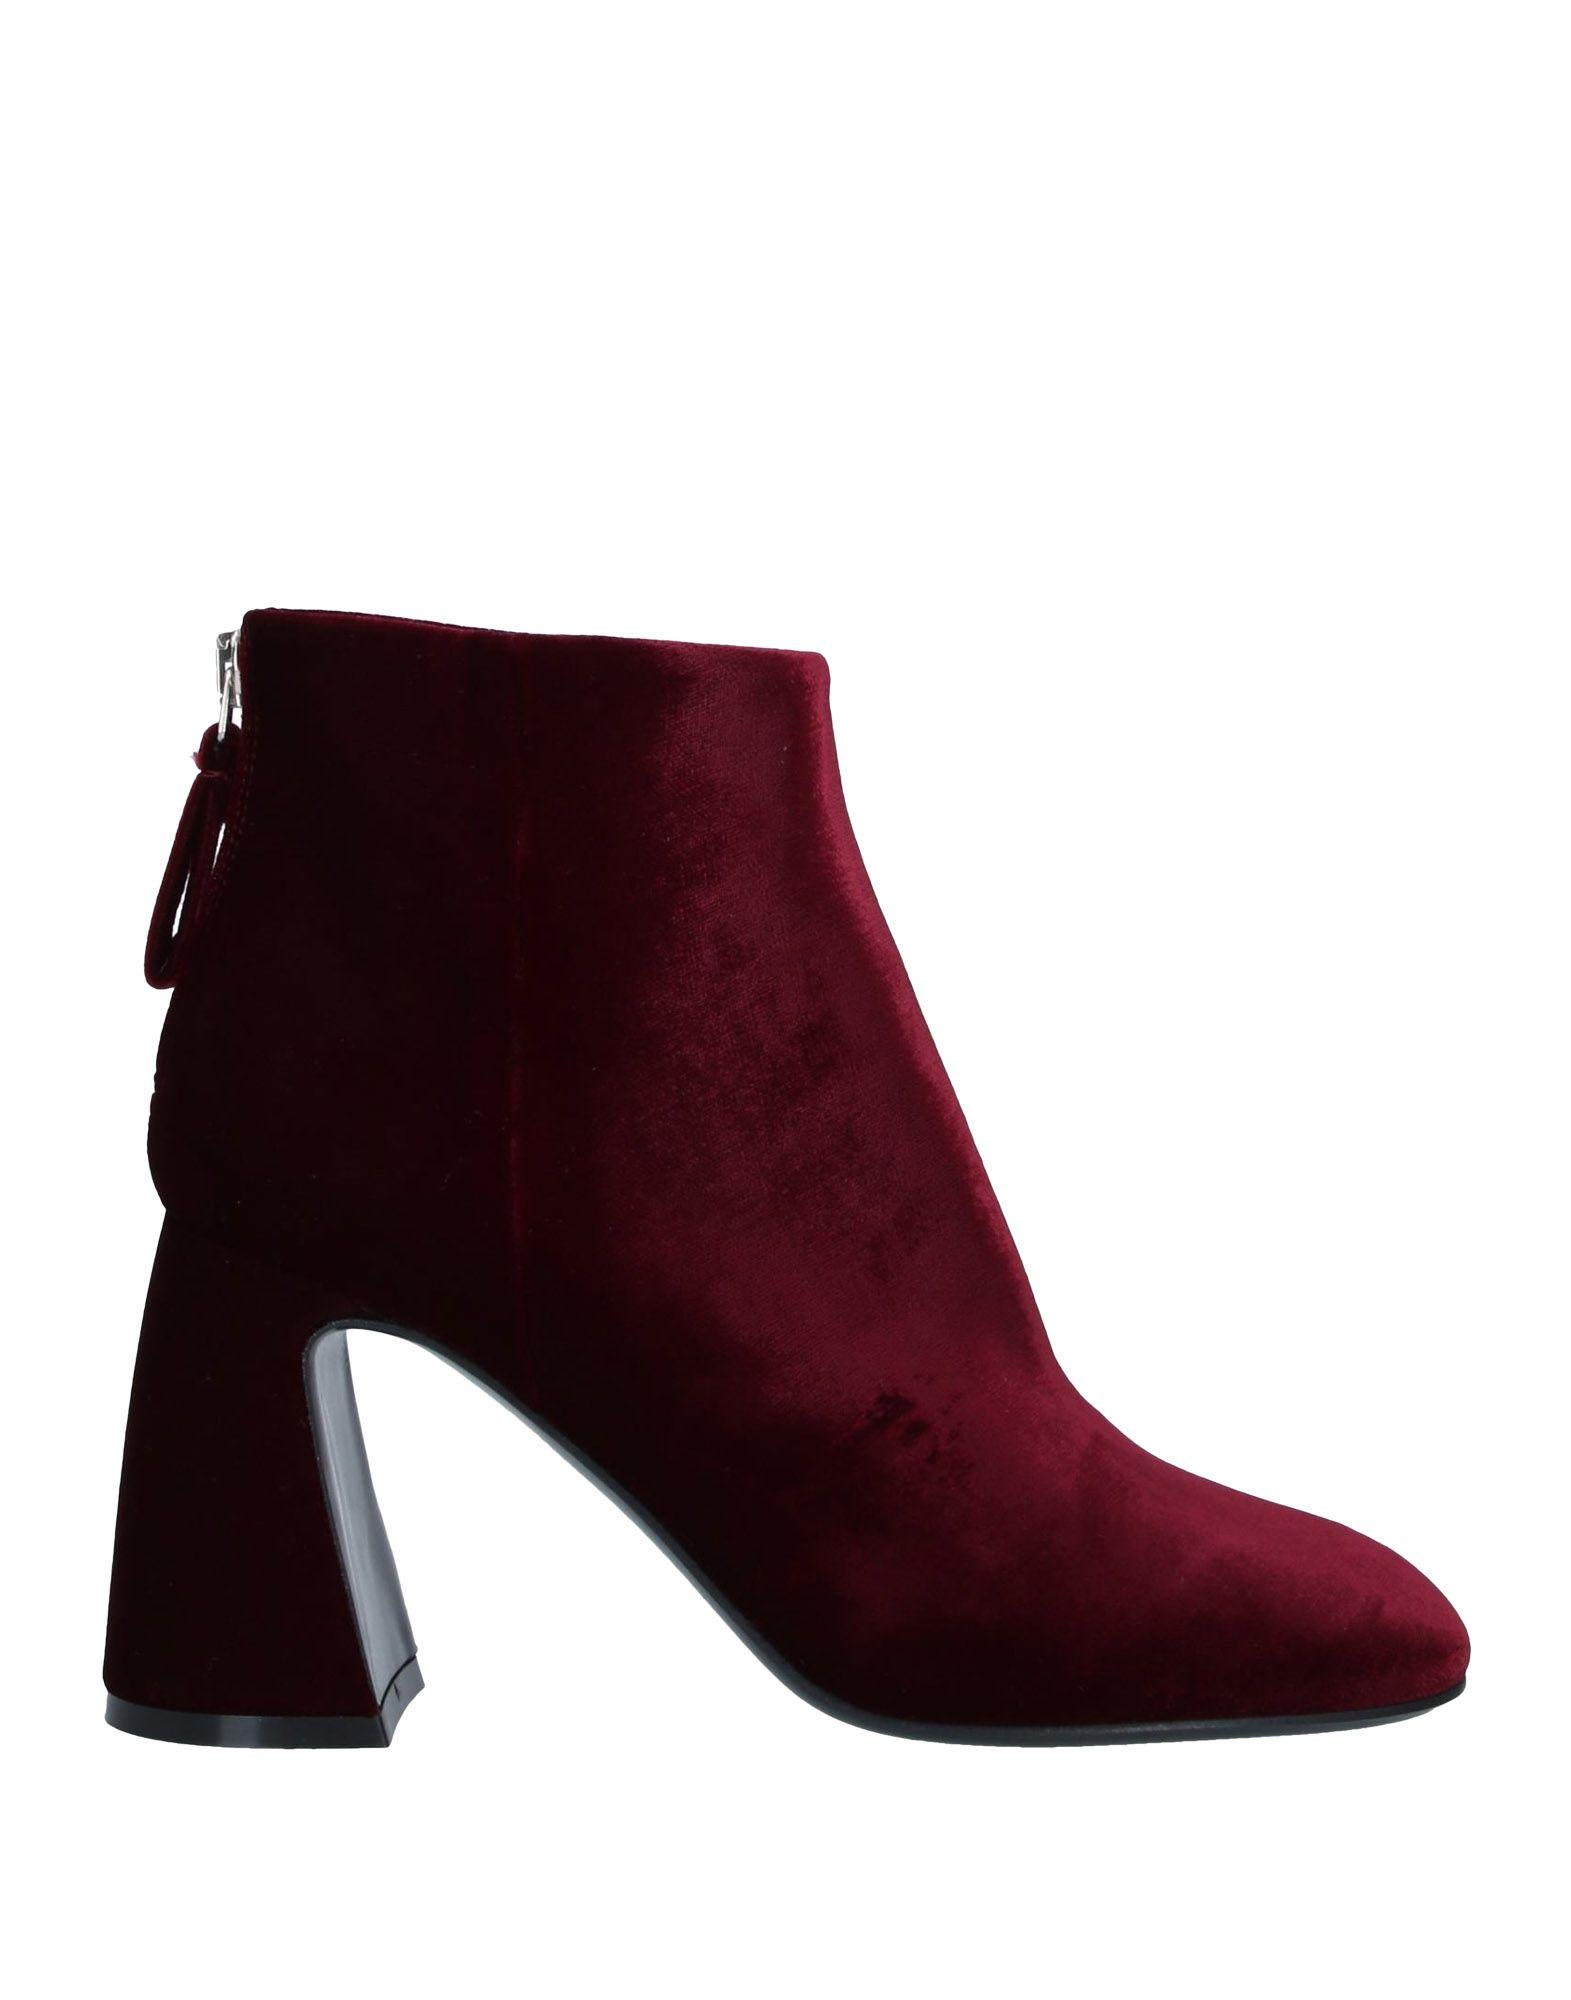 Premiata Velvet Ankle Boots in Maroon (Red) - Lyst